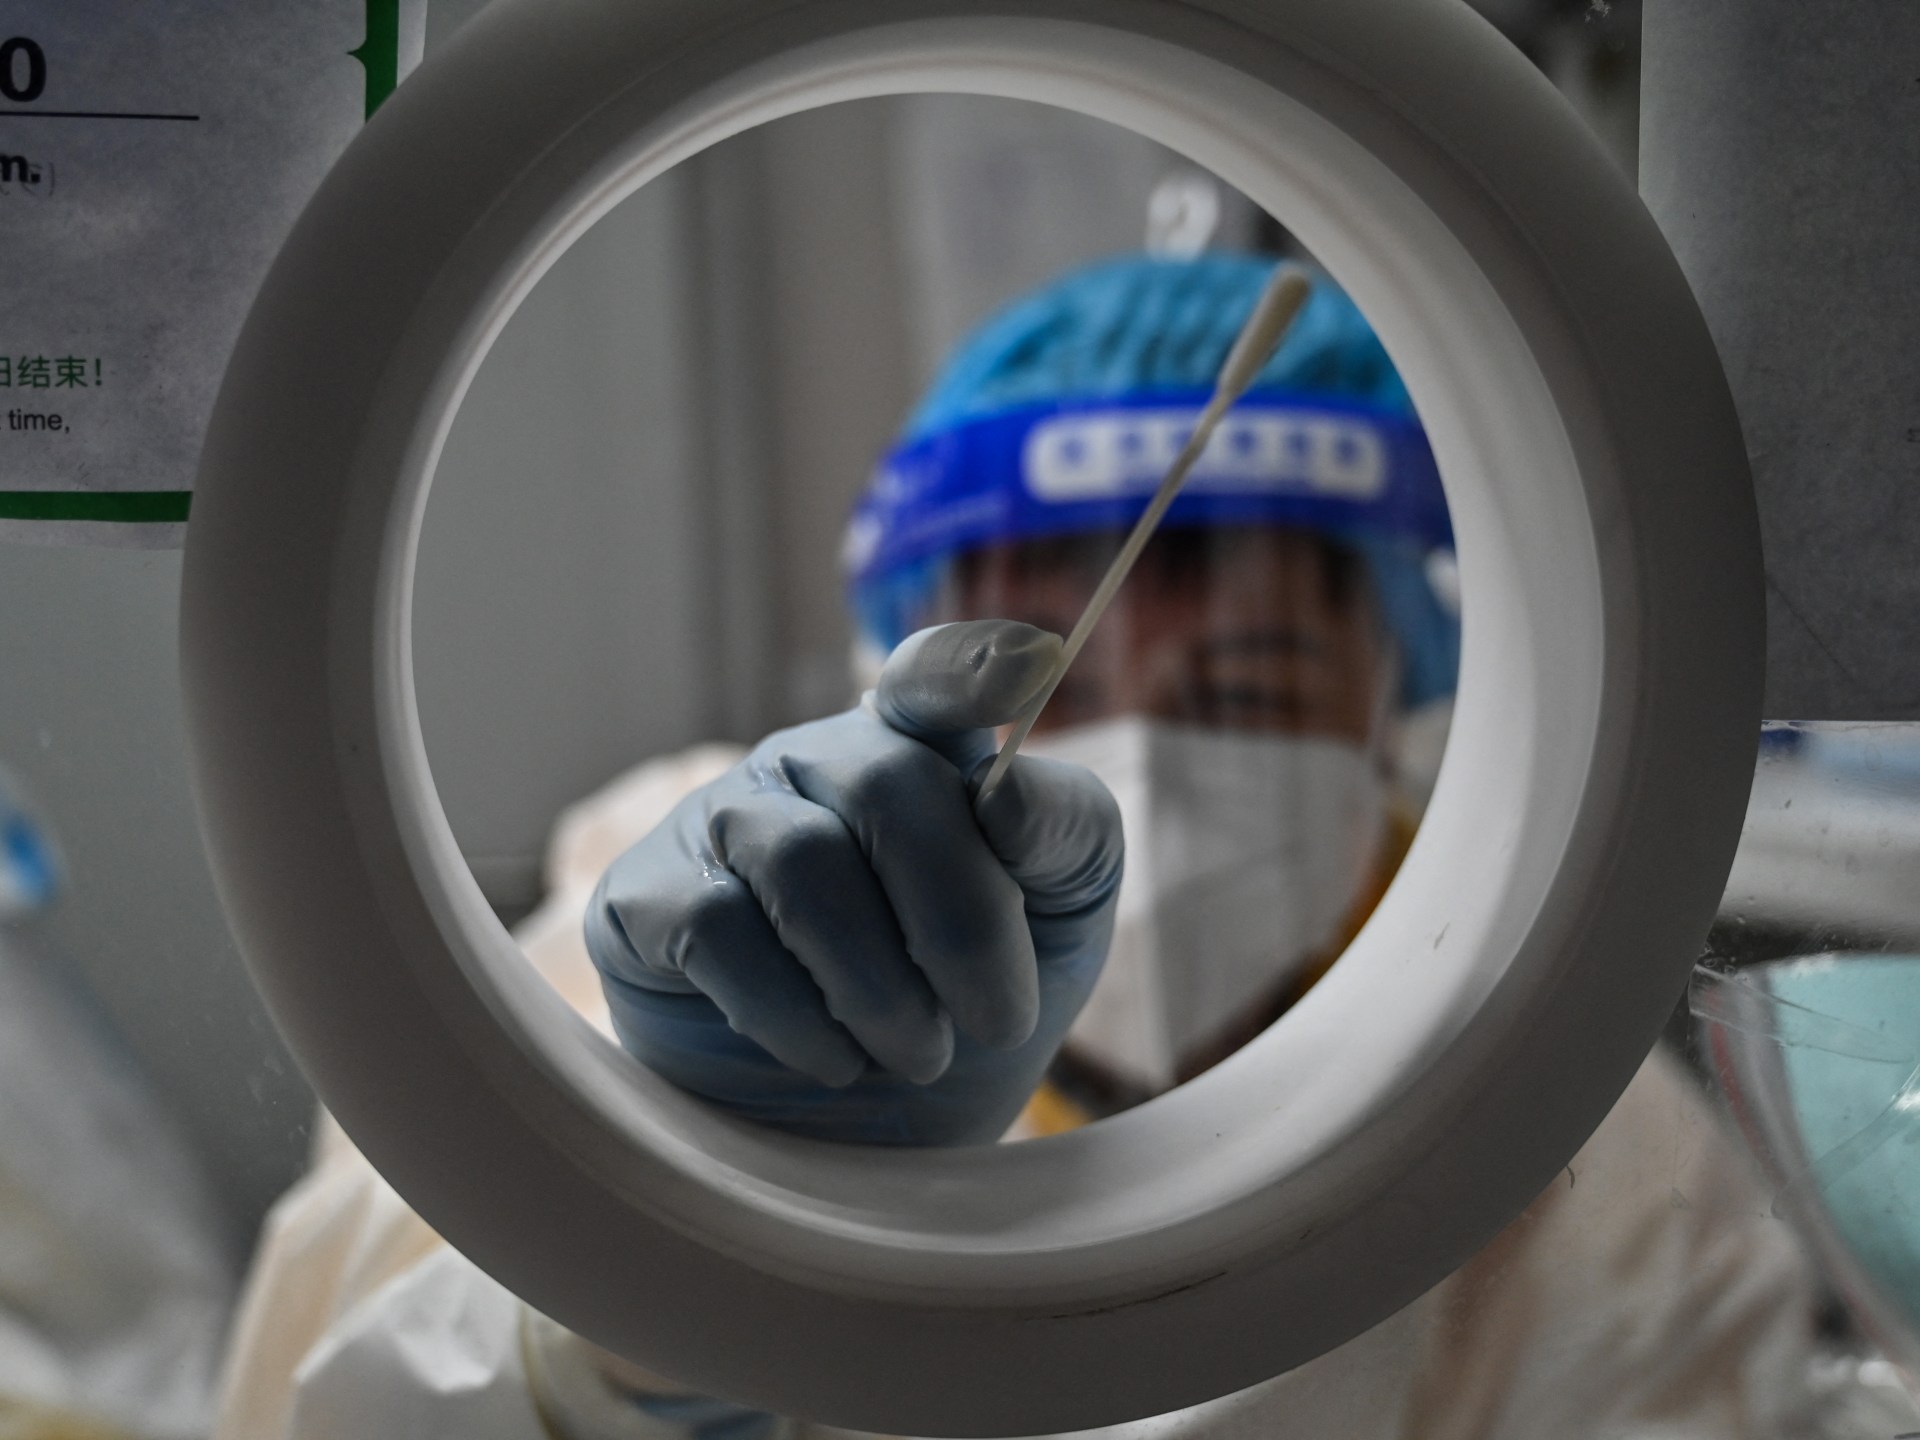 Confusion and anxiety in China as draconian COVID curbs eased | Coronavirus pandemic News